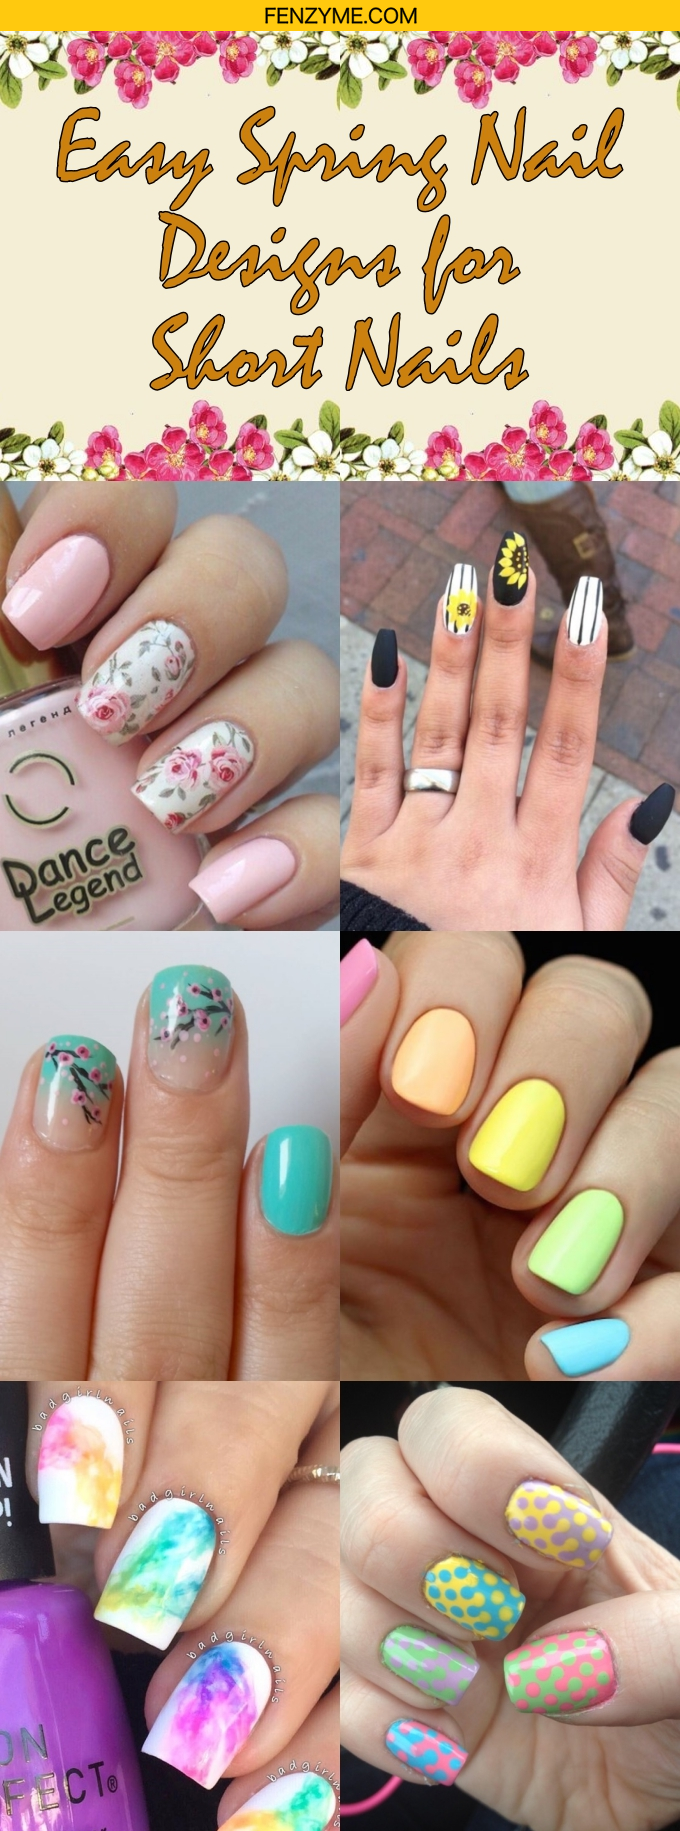 Easy Spring Nail Designs for Short Nails